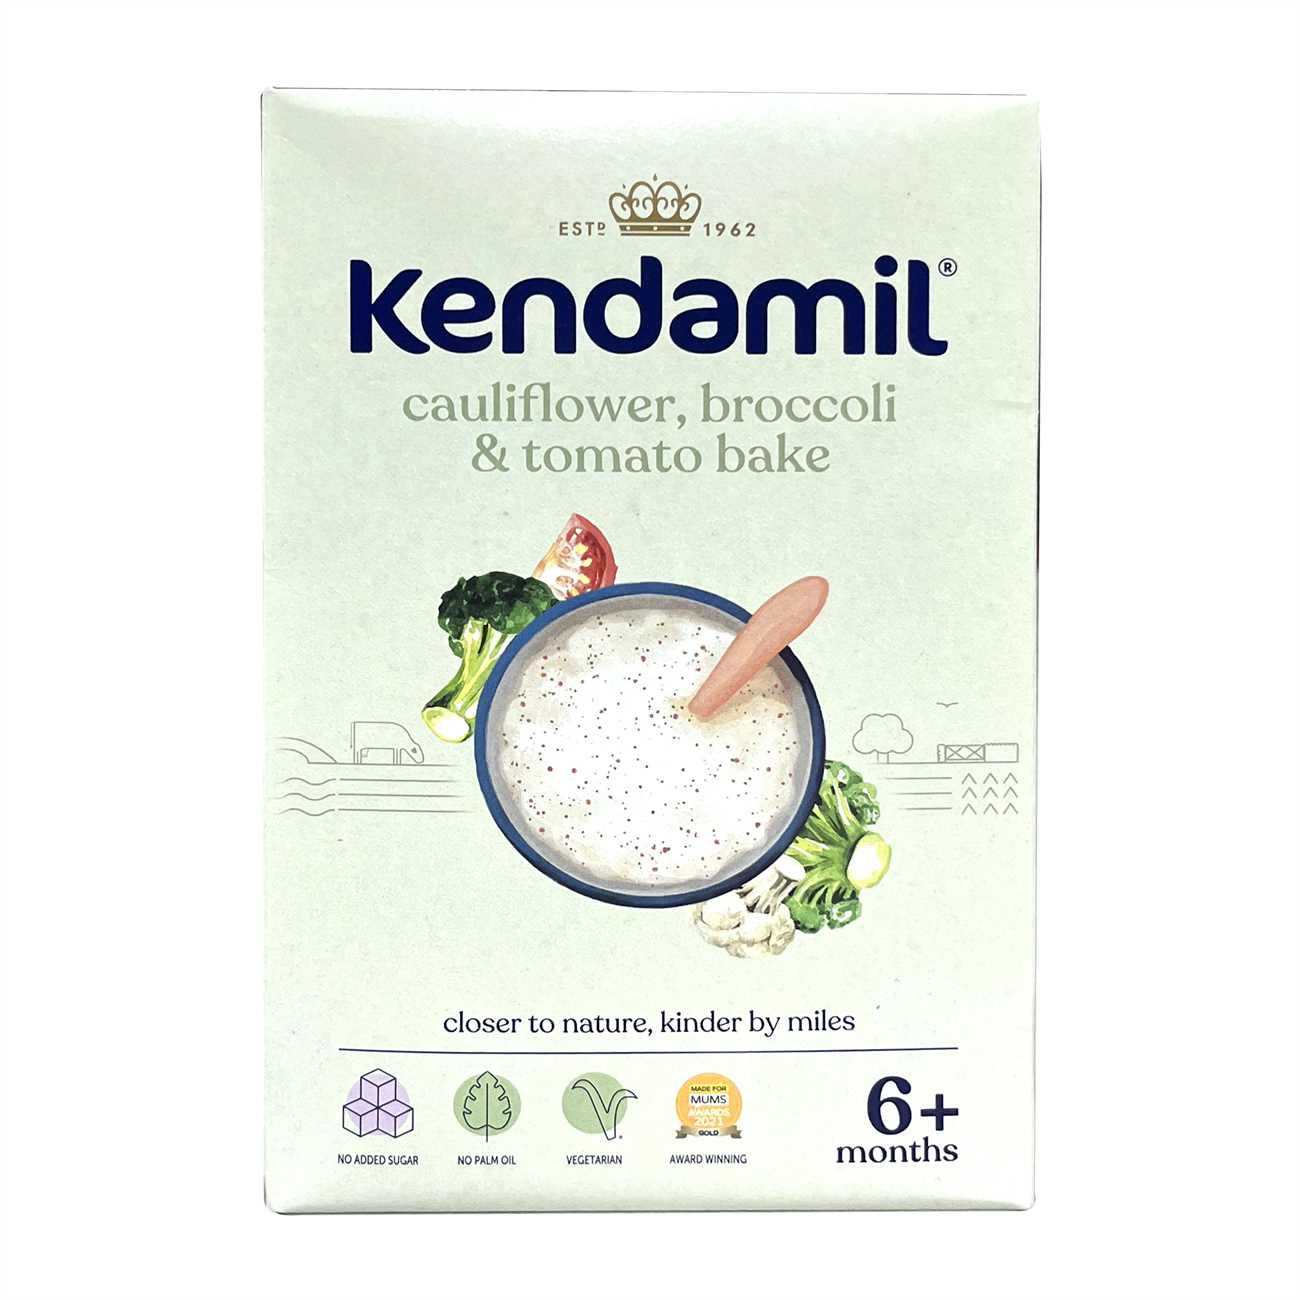 Kendamil Cauliflower Broccoli & Tomato Bake Cereal for your Baby, 6+months - 150g